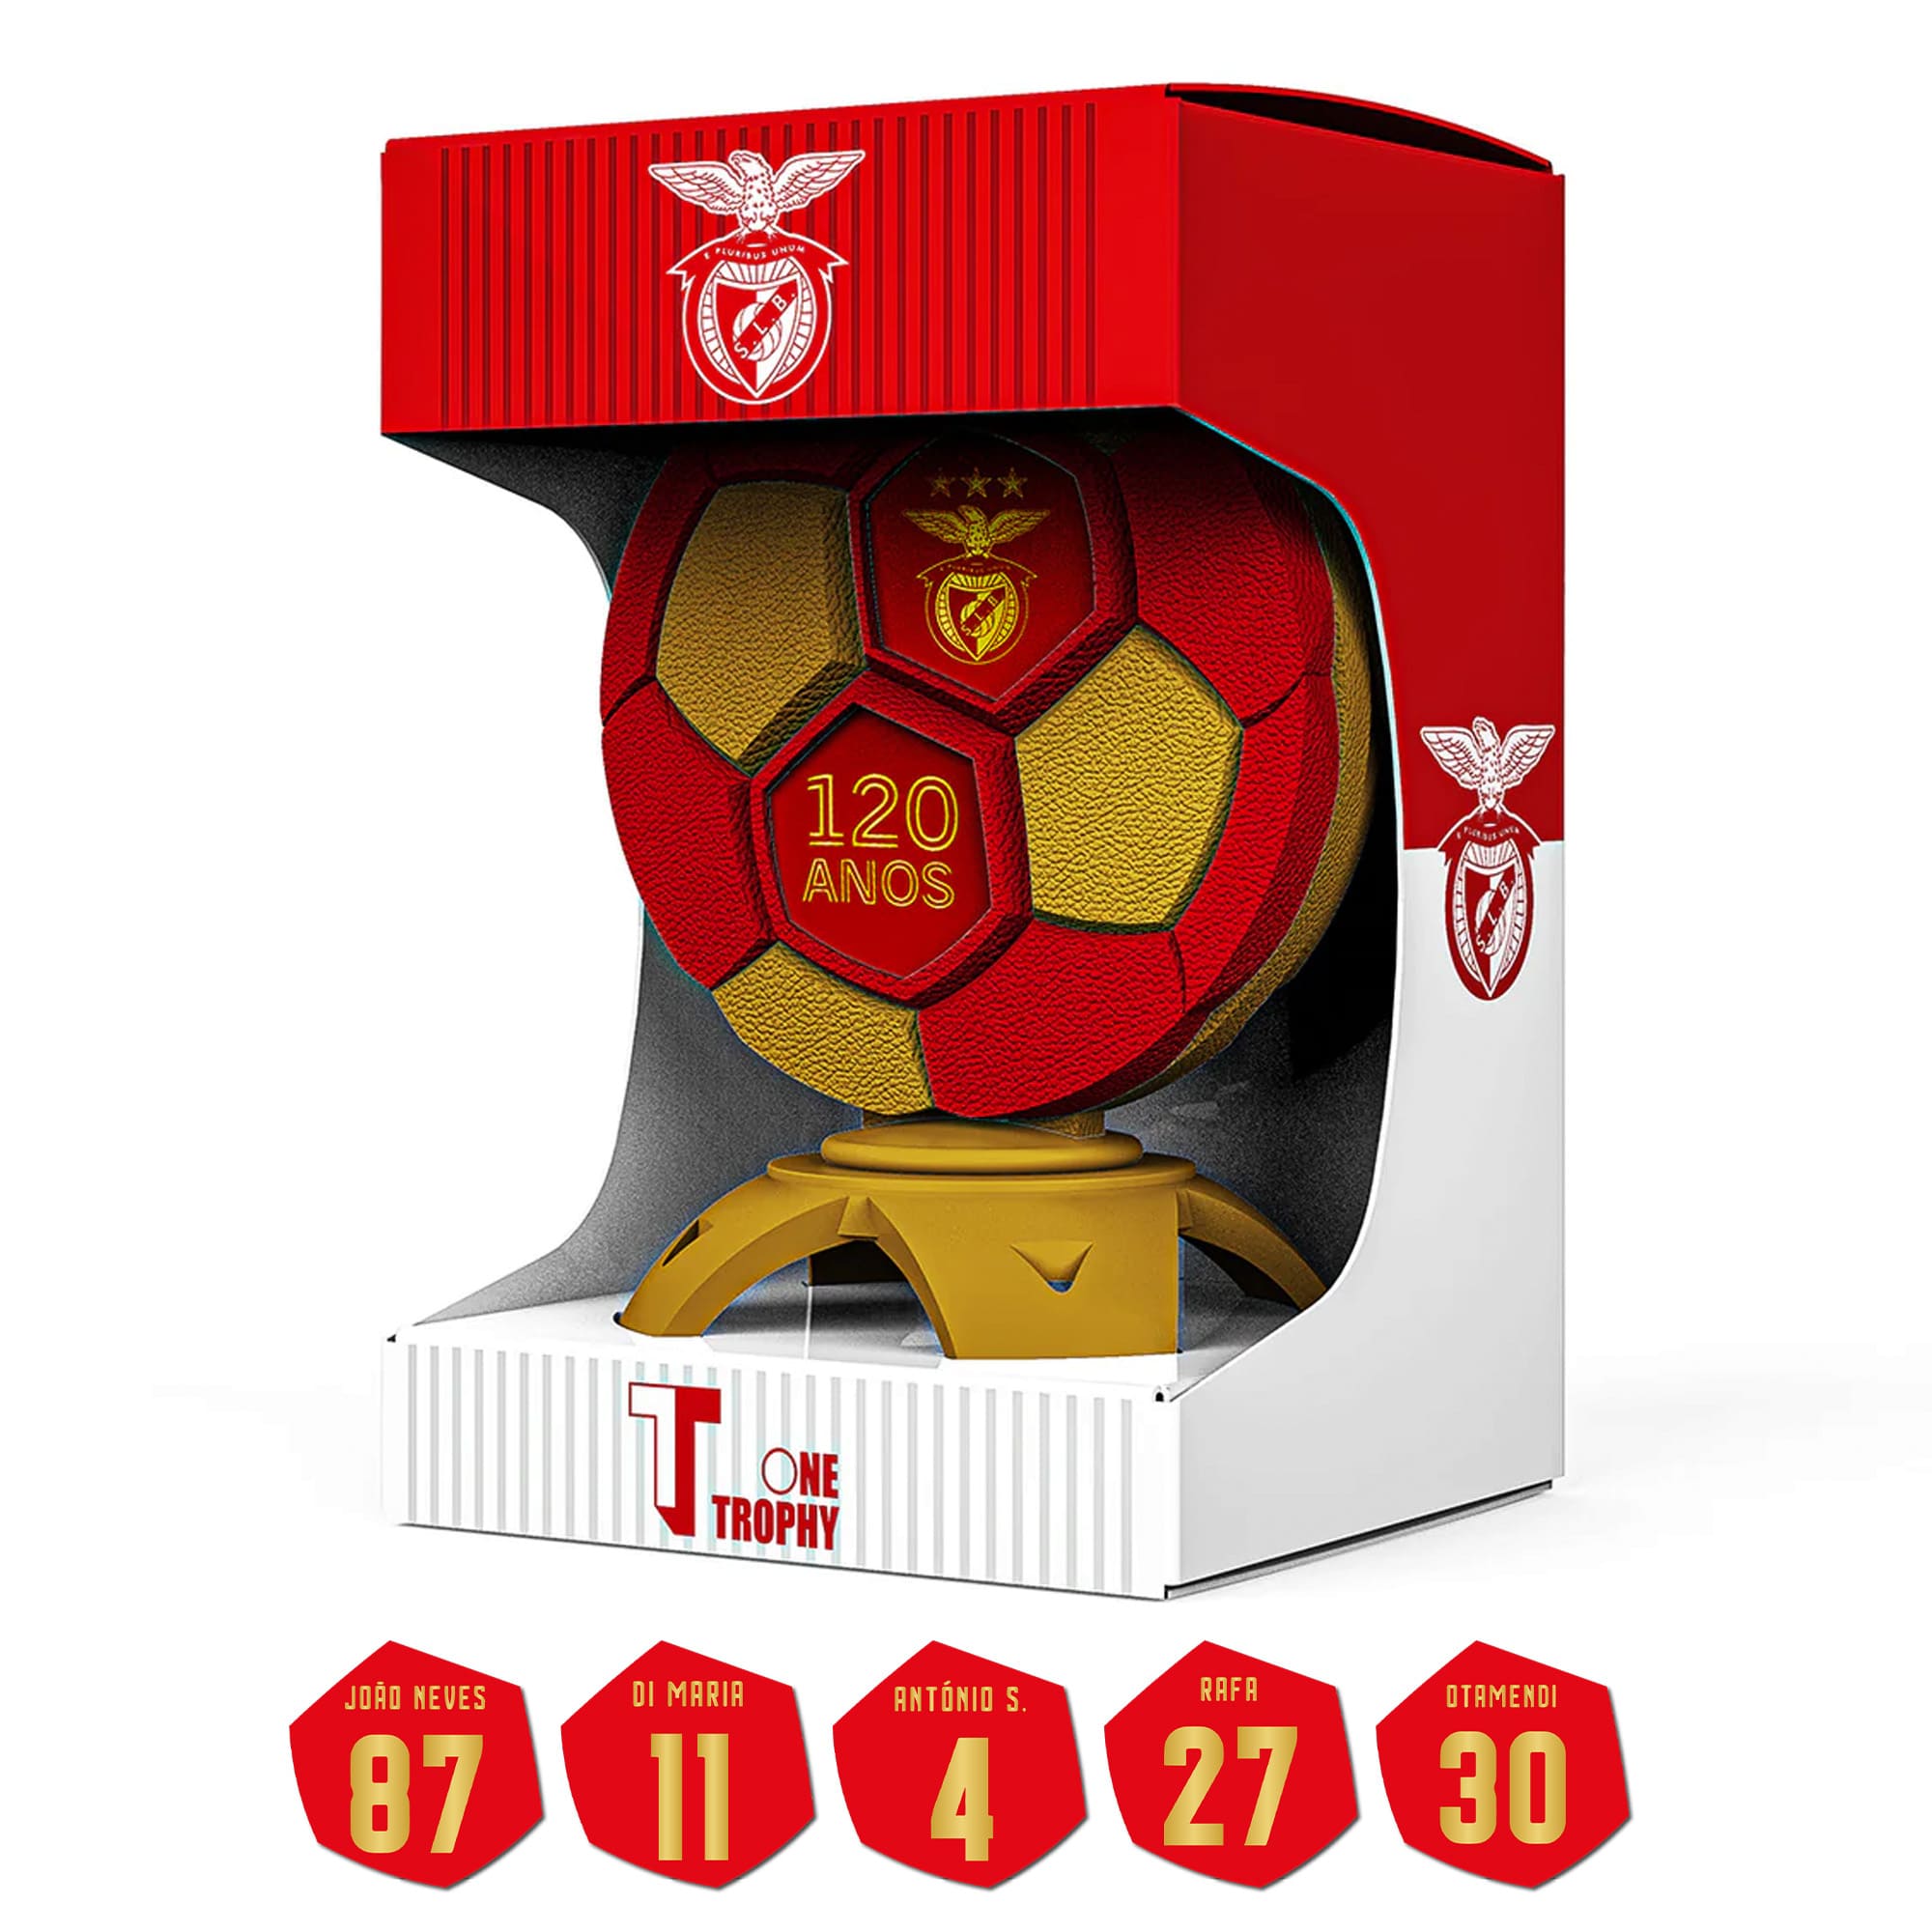 OneTrophy X SL Benfica - 120 Years